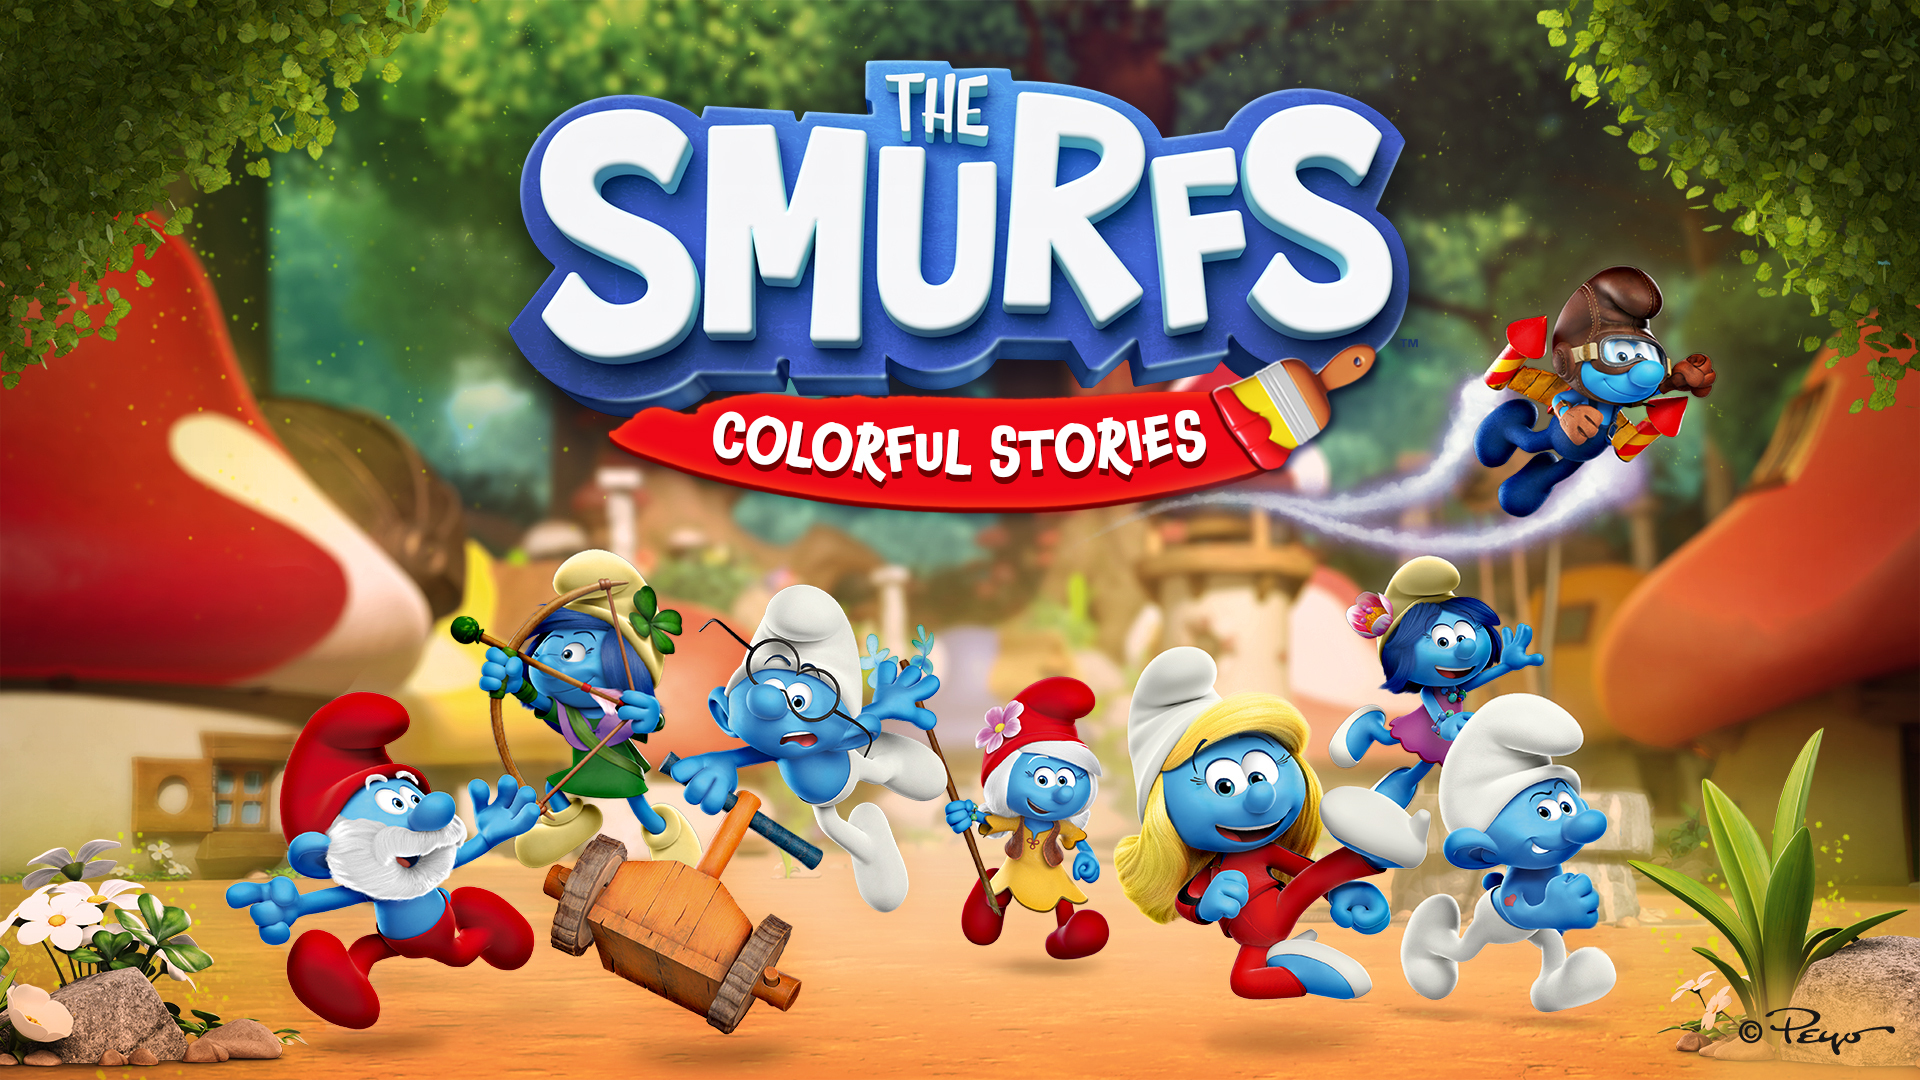 The Smurfs: Colorful Stories - Metacritic